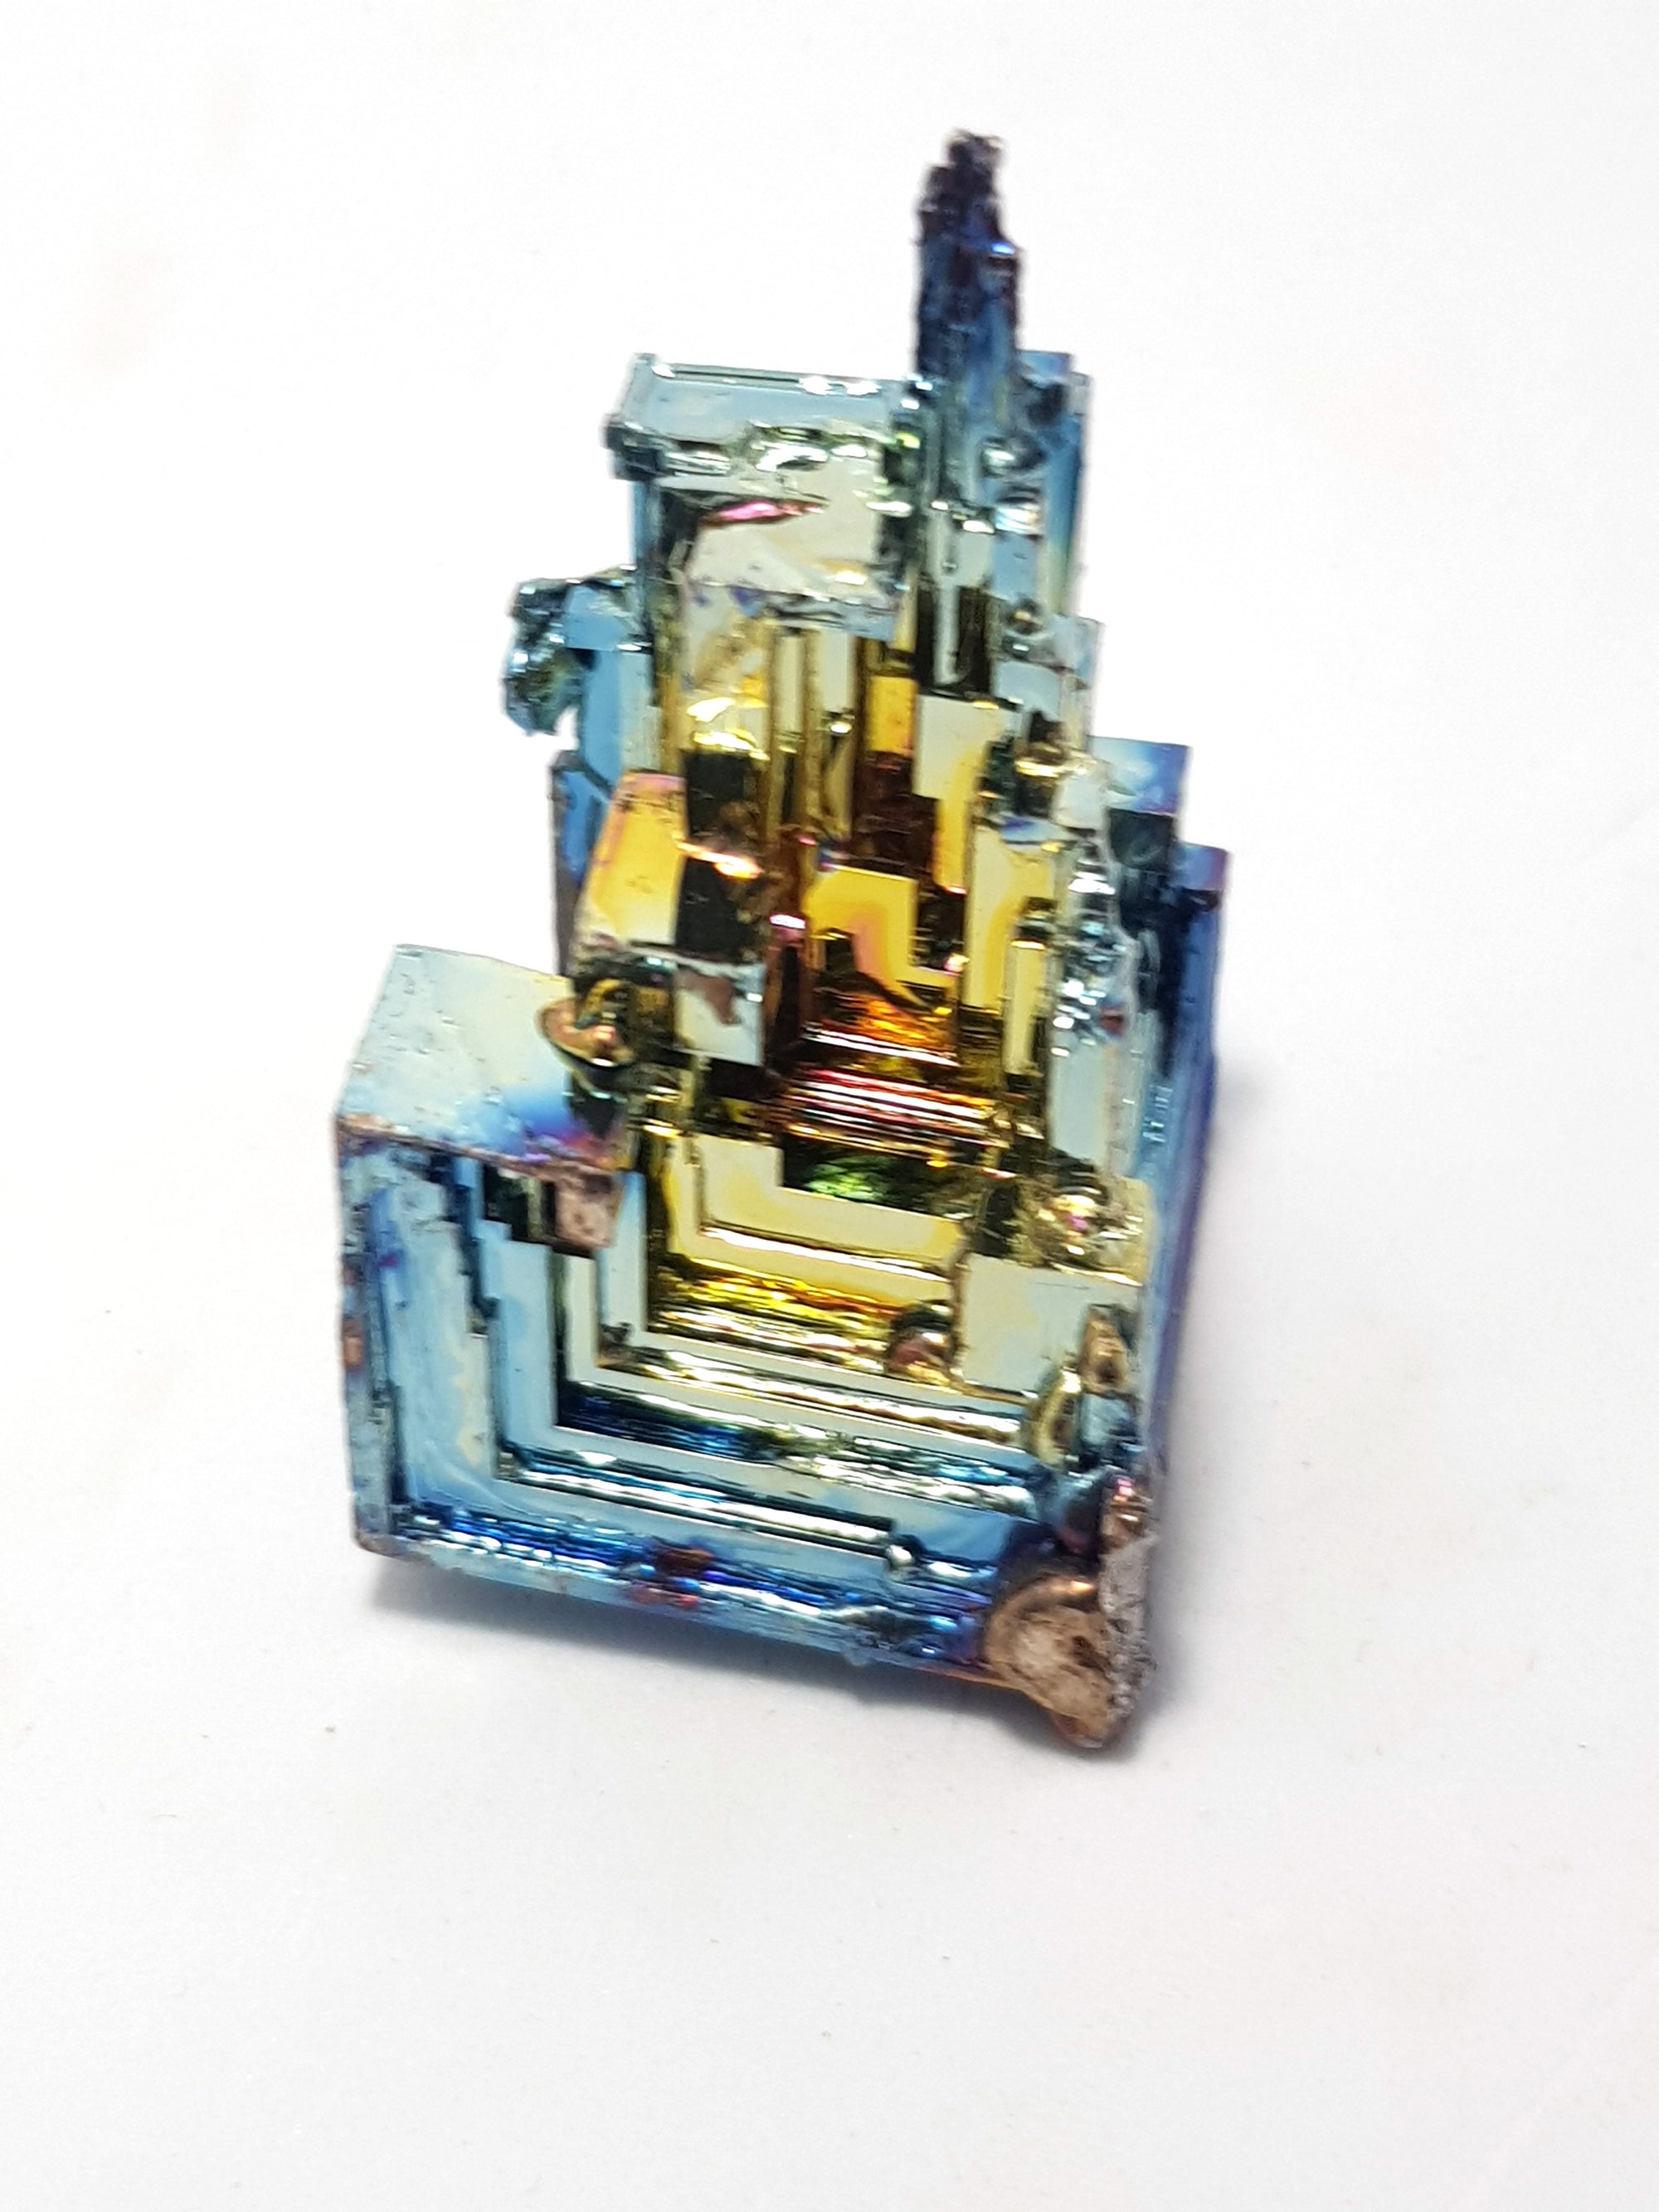 bismuth crystal. This shows the crystal's skeletal form it is very iridescent